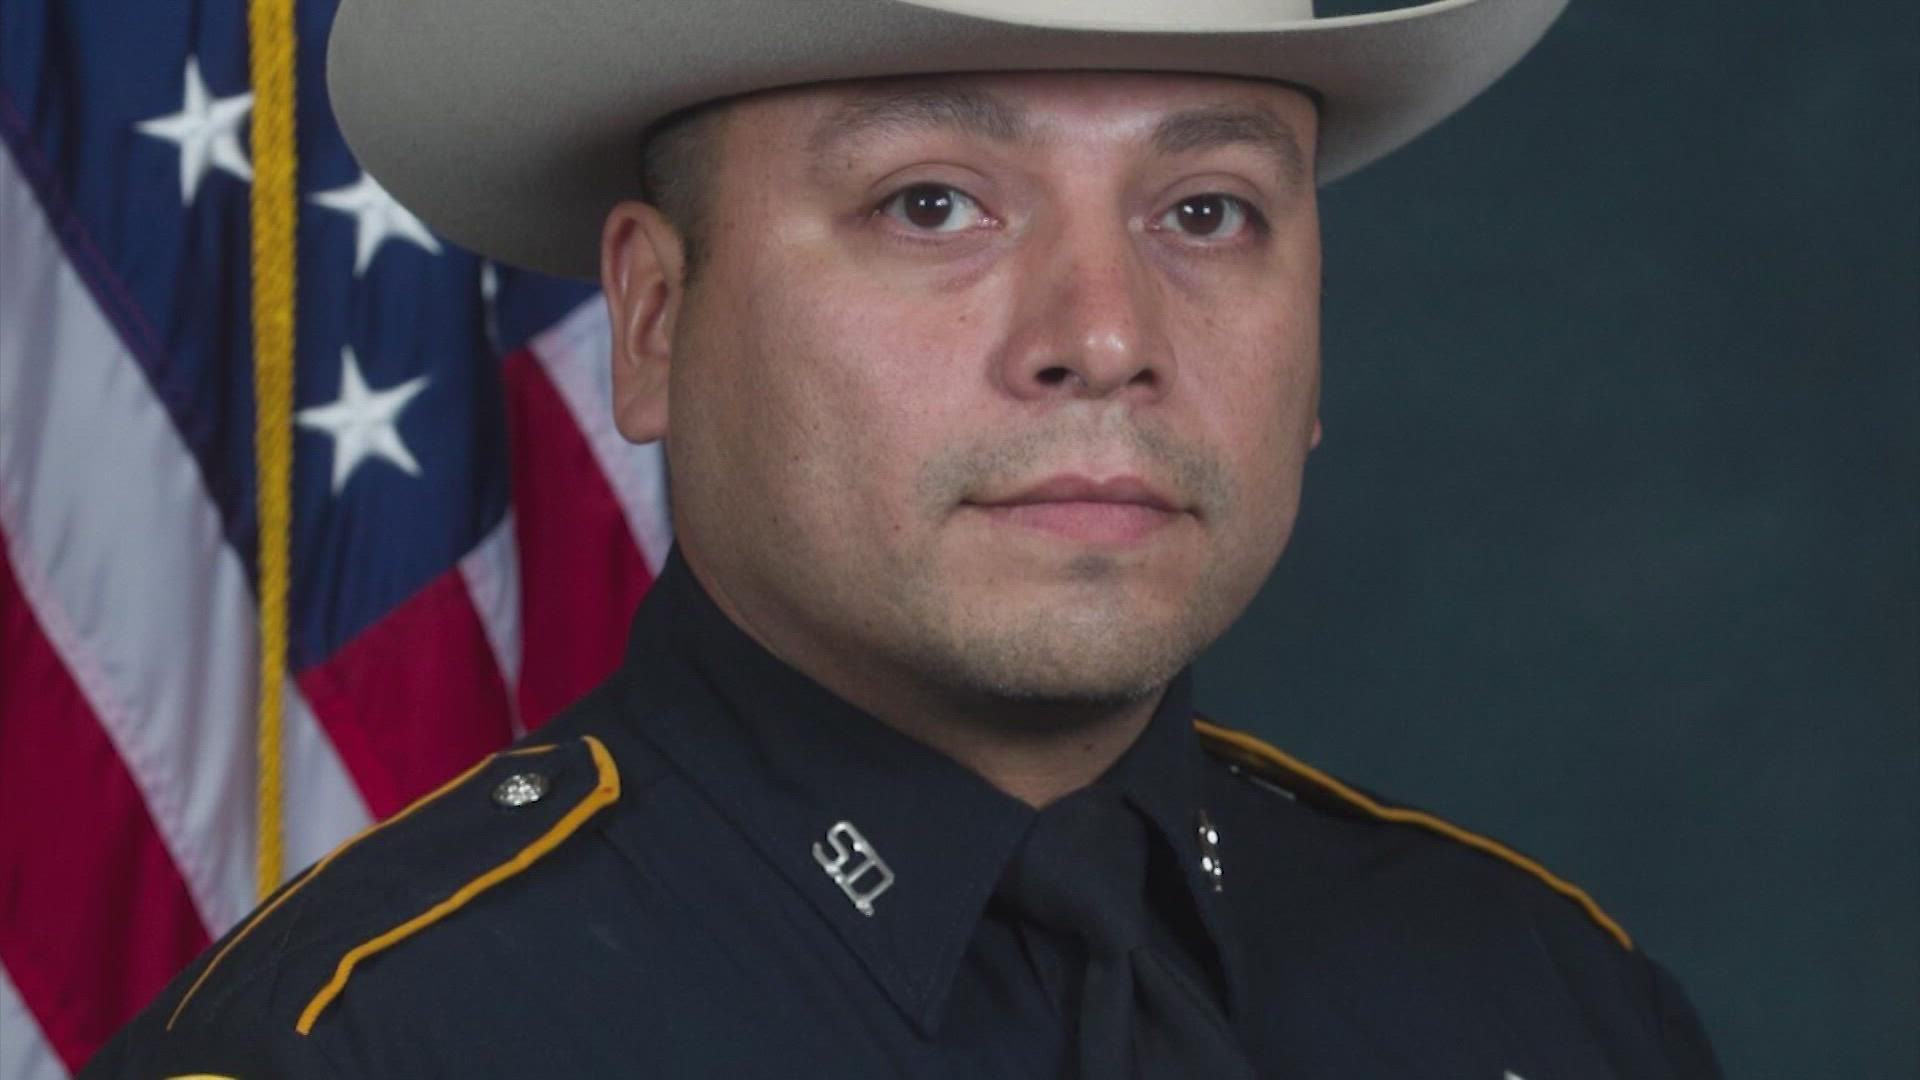 The third suspect who has been sought after in the shooting death of Harris County Sheriff’s Office deputy Darren Almendarez has been arrested, the sheriff said.